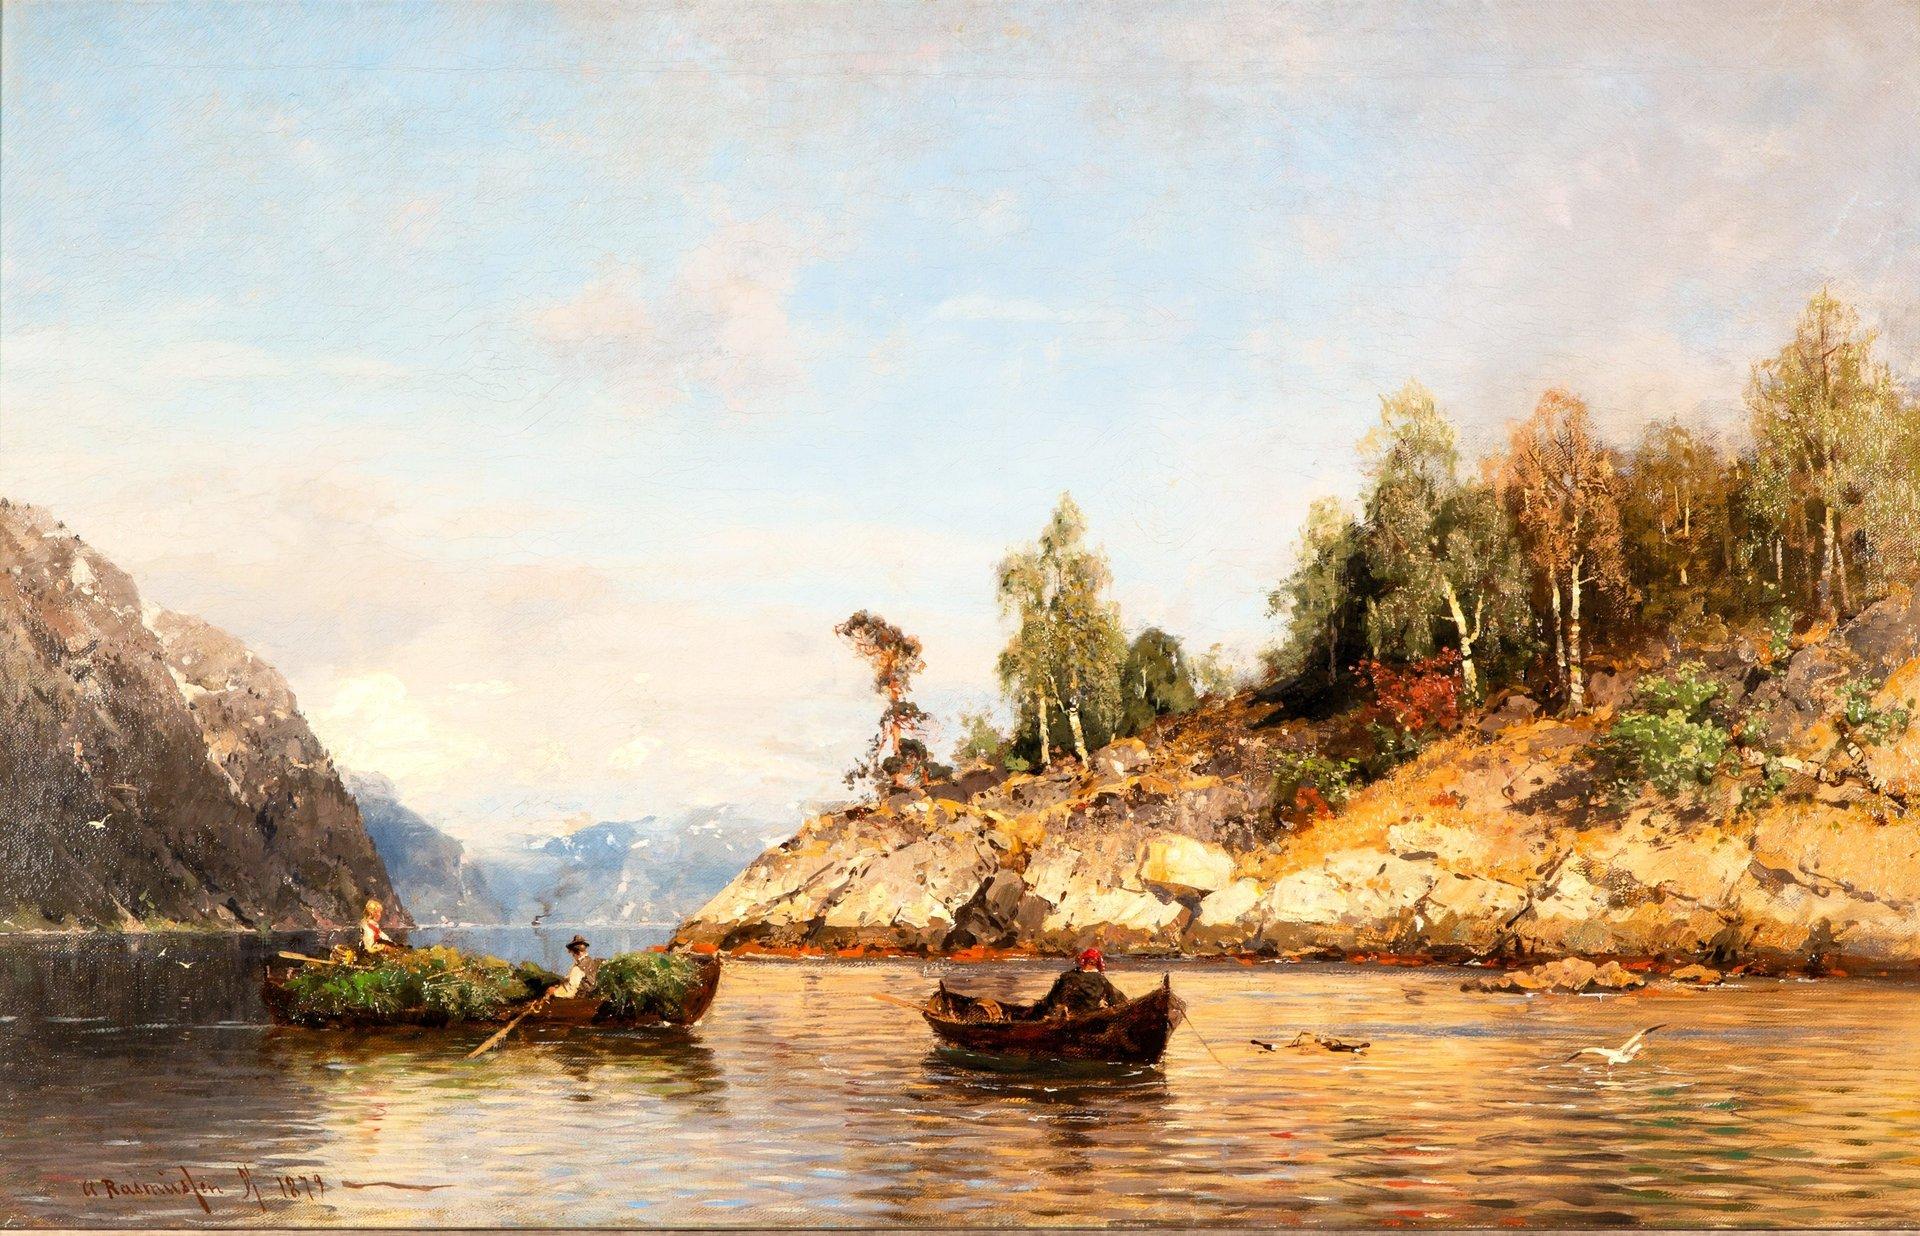 Georg Anton Rasmussen (August 7, 1842, Stavanger - October 23, 1914, Berlin) was a Norwegian landscape painter who spent most of his career in Germany.
He began his artistic training in Bergen, where he studied with Johan Ludvig Losting and Anders